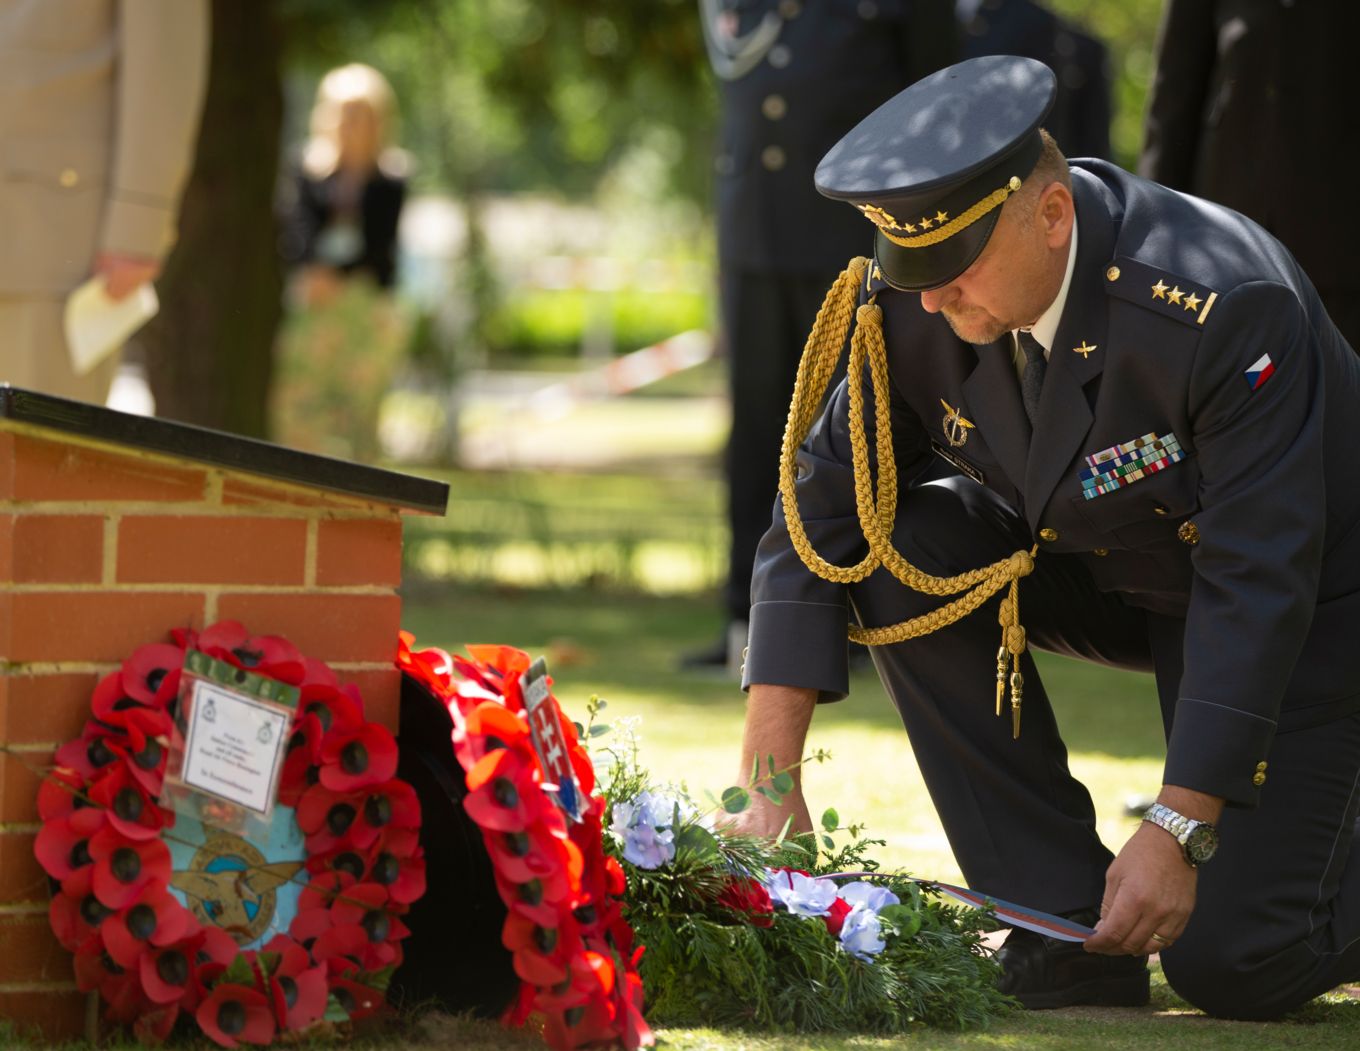 Col Gen Staff Straka, Commander 22 HAB Namest, lays a wreath at the station memorial 